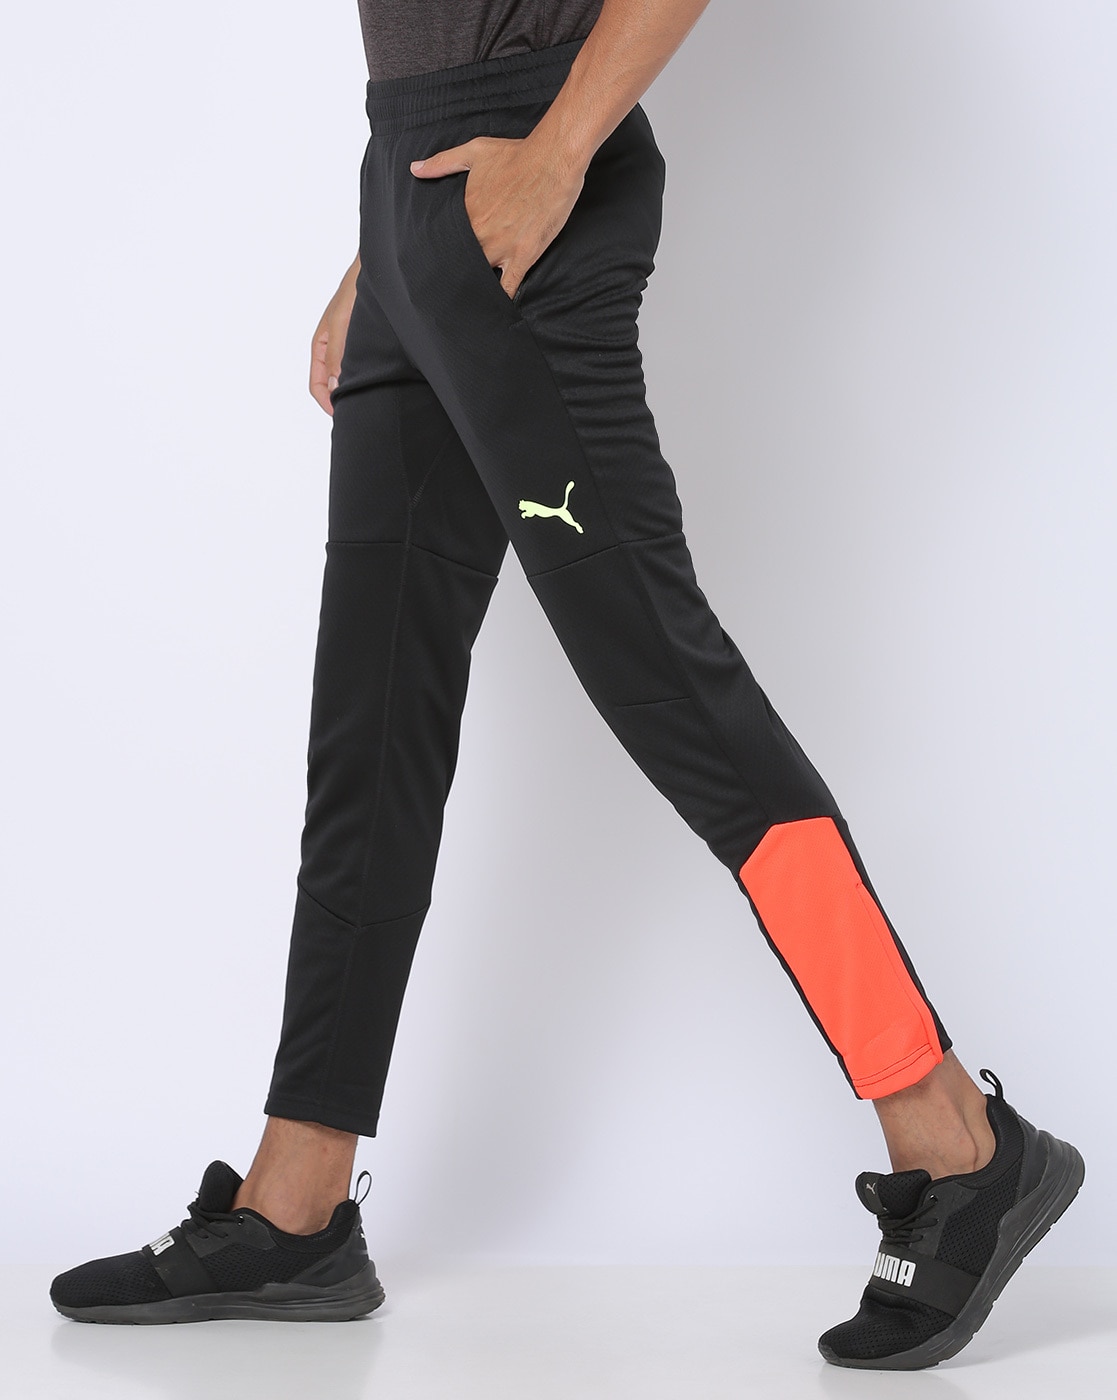 AG17 Muscle Fit Trousers - Black/Pintuck